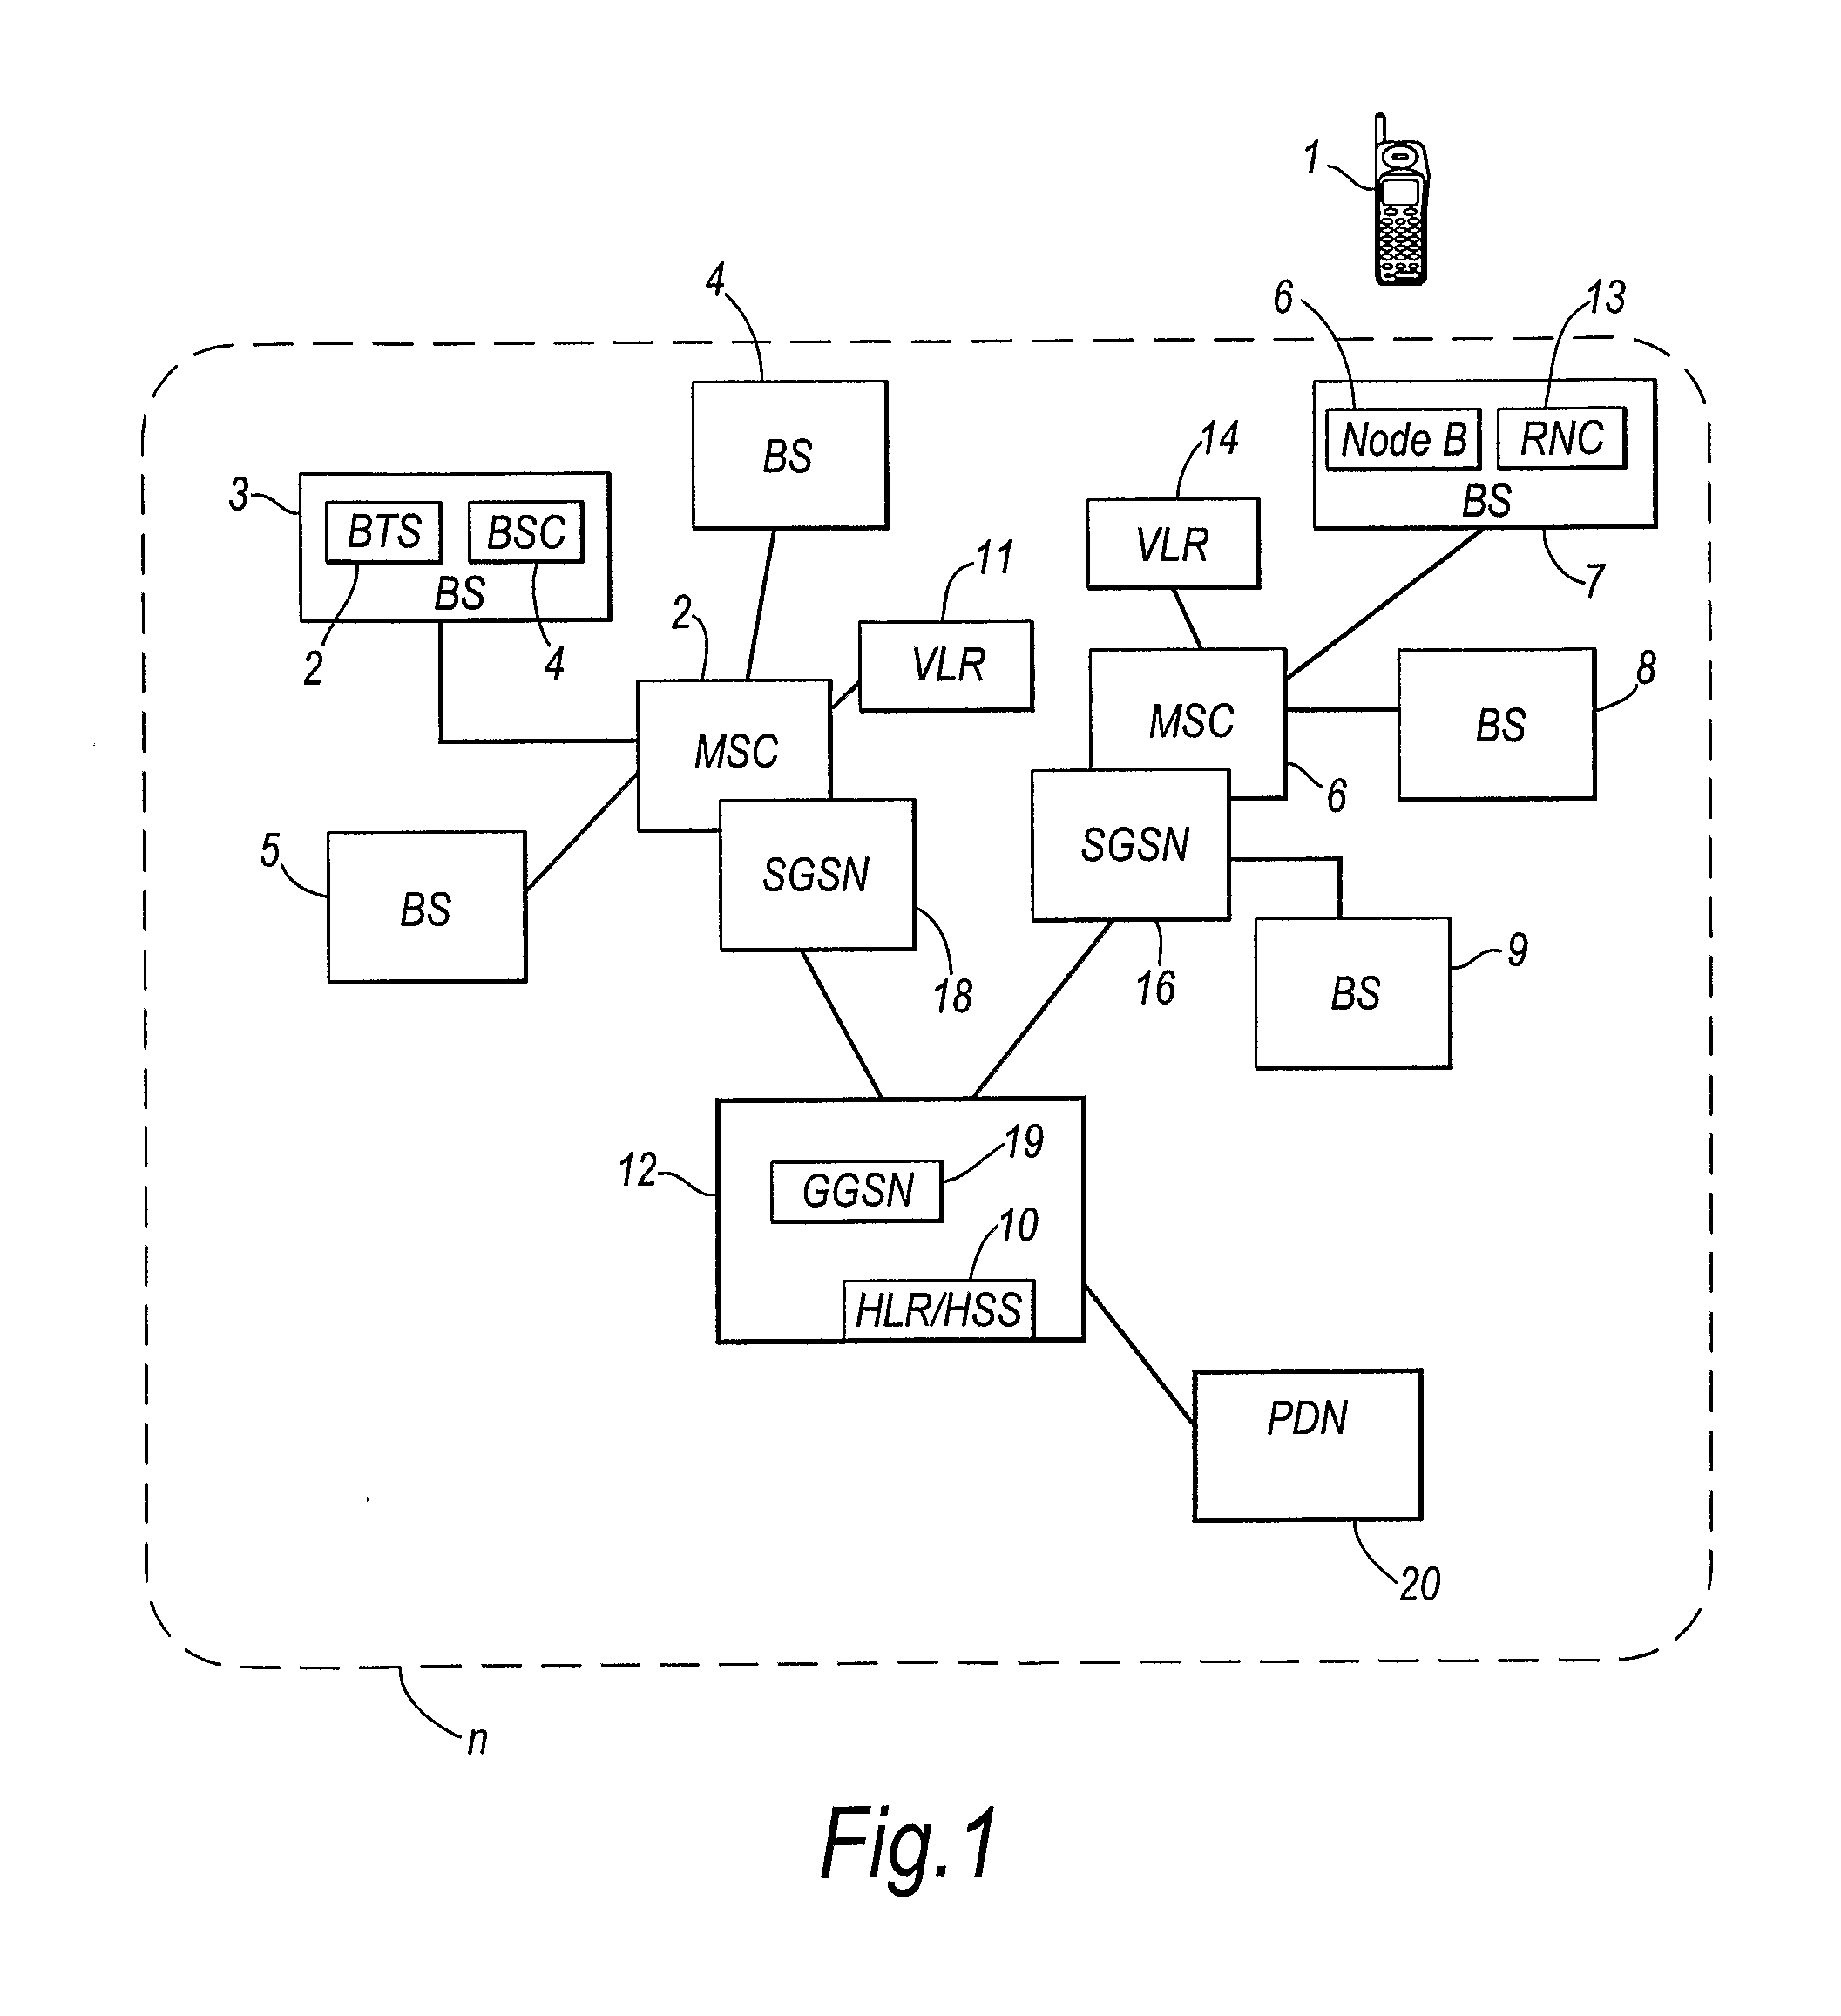 Network and Method for Optimizing Cell Reselection by Using an Estimation of Mobility of a Mobile Terminal